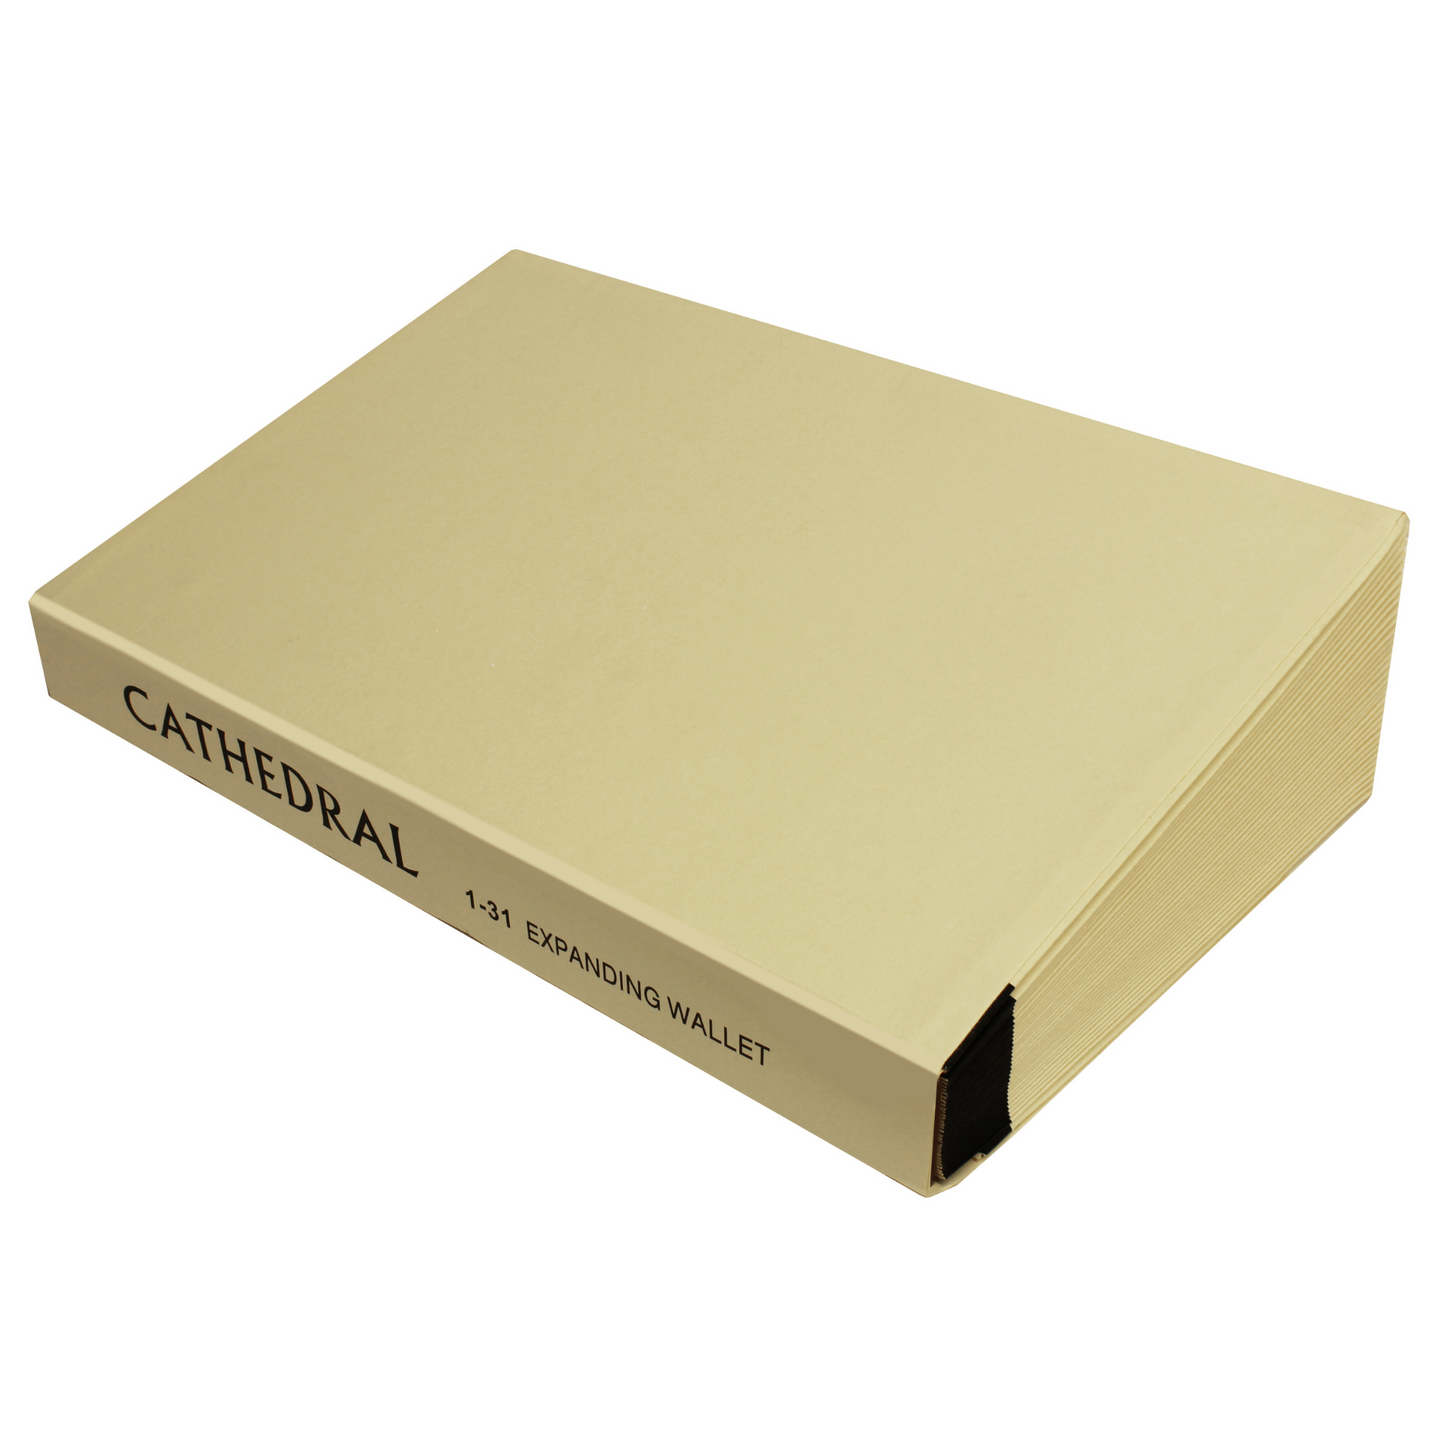 Closed beige Cathedral 1-31 expanding wallet lying flat, with black side reinforcement, designed for file organization, as seen from a slightly elevated angle.